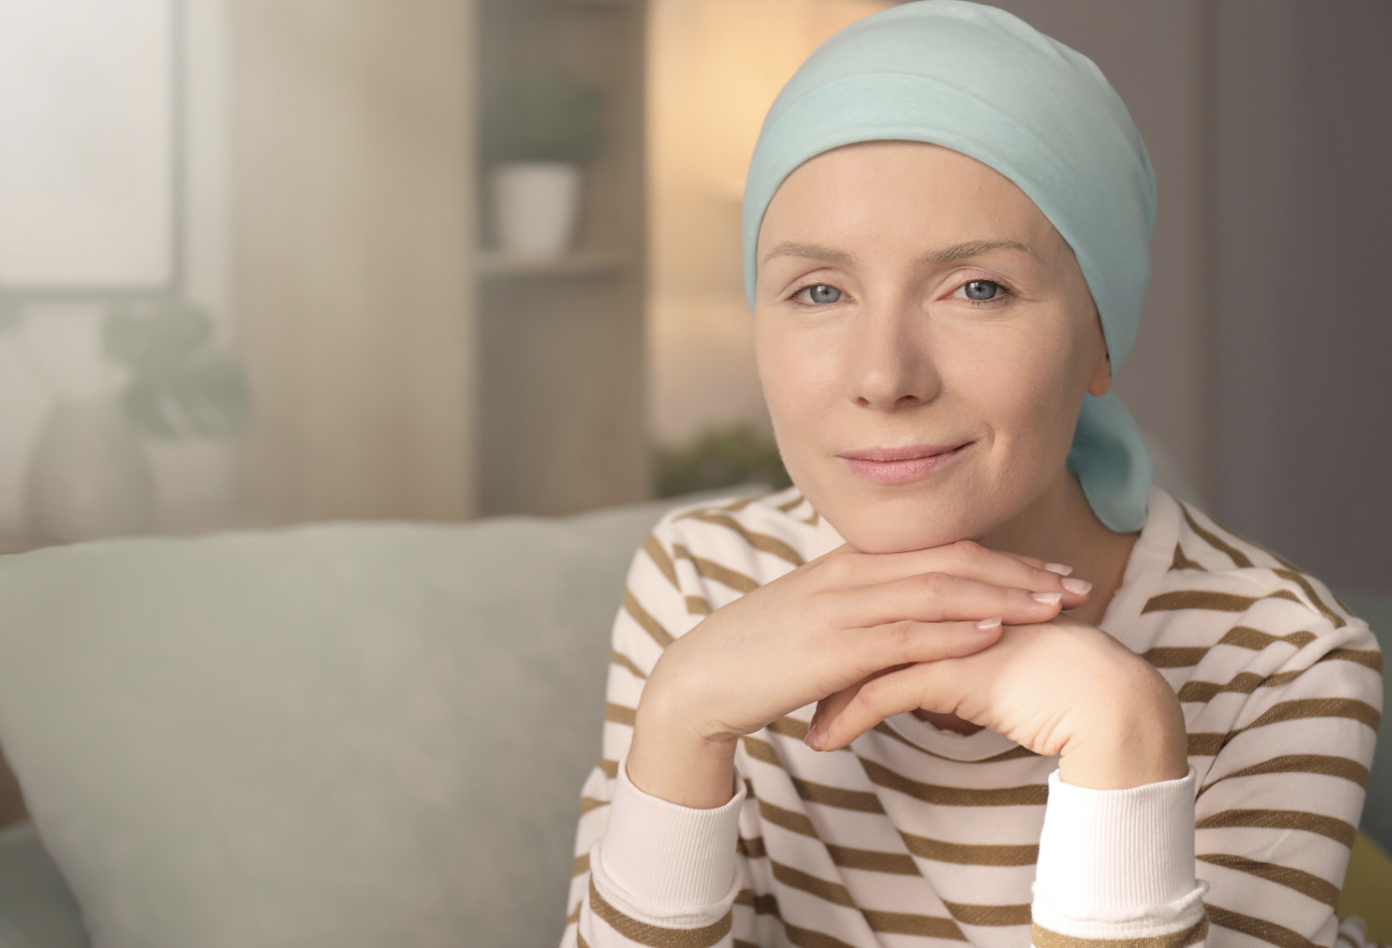 Patients diagnosed with cancer who have been granted authorization to use a test-at-home kit